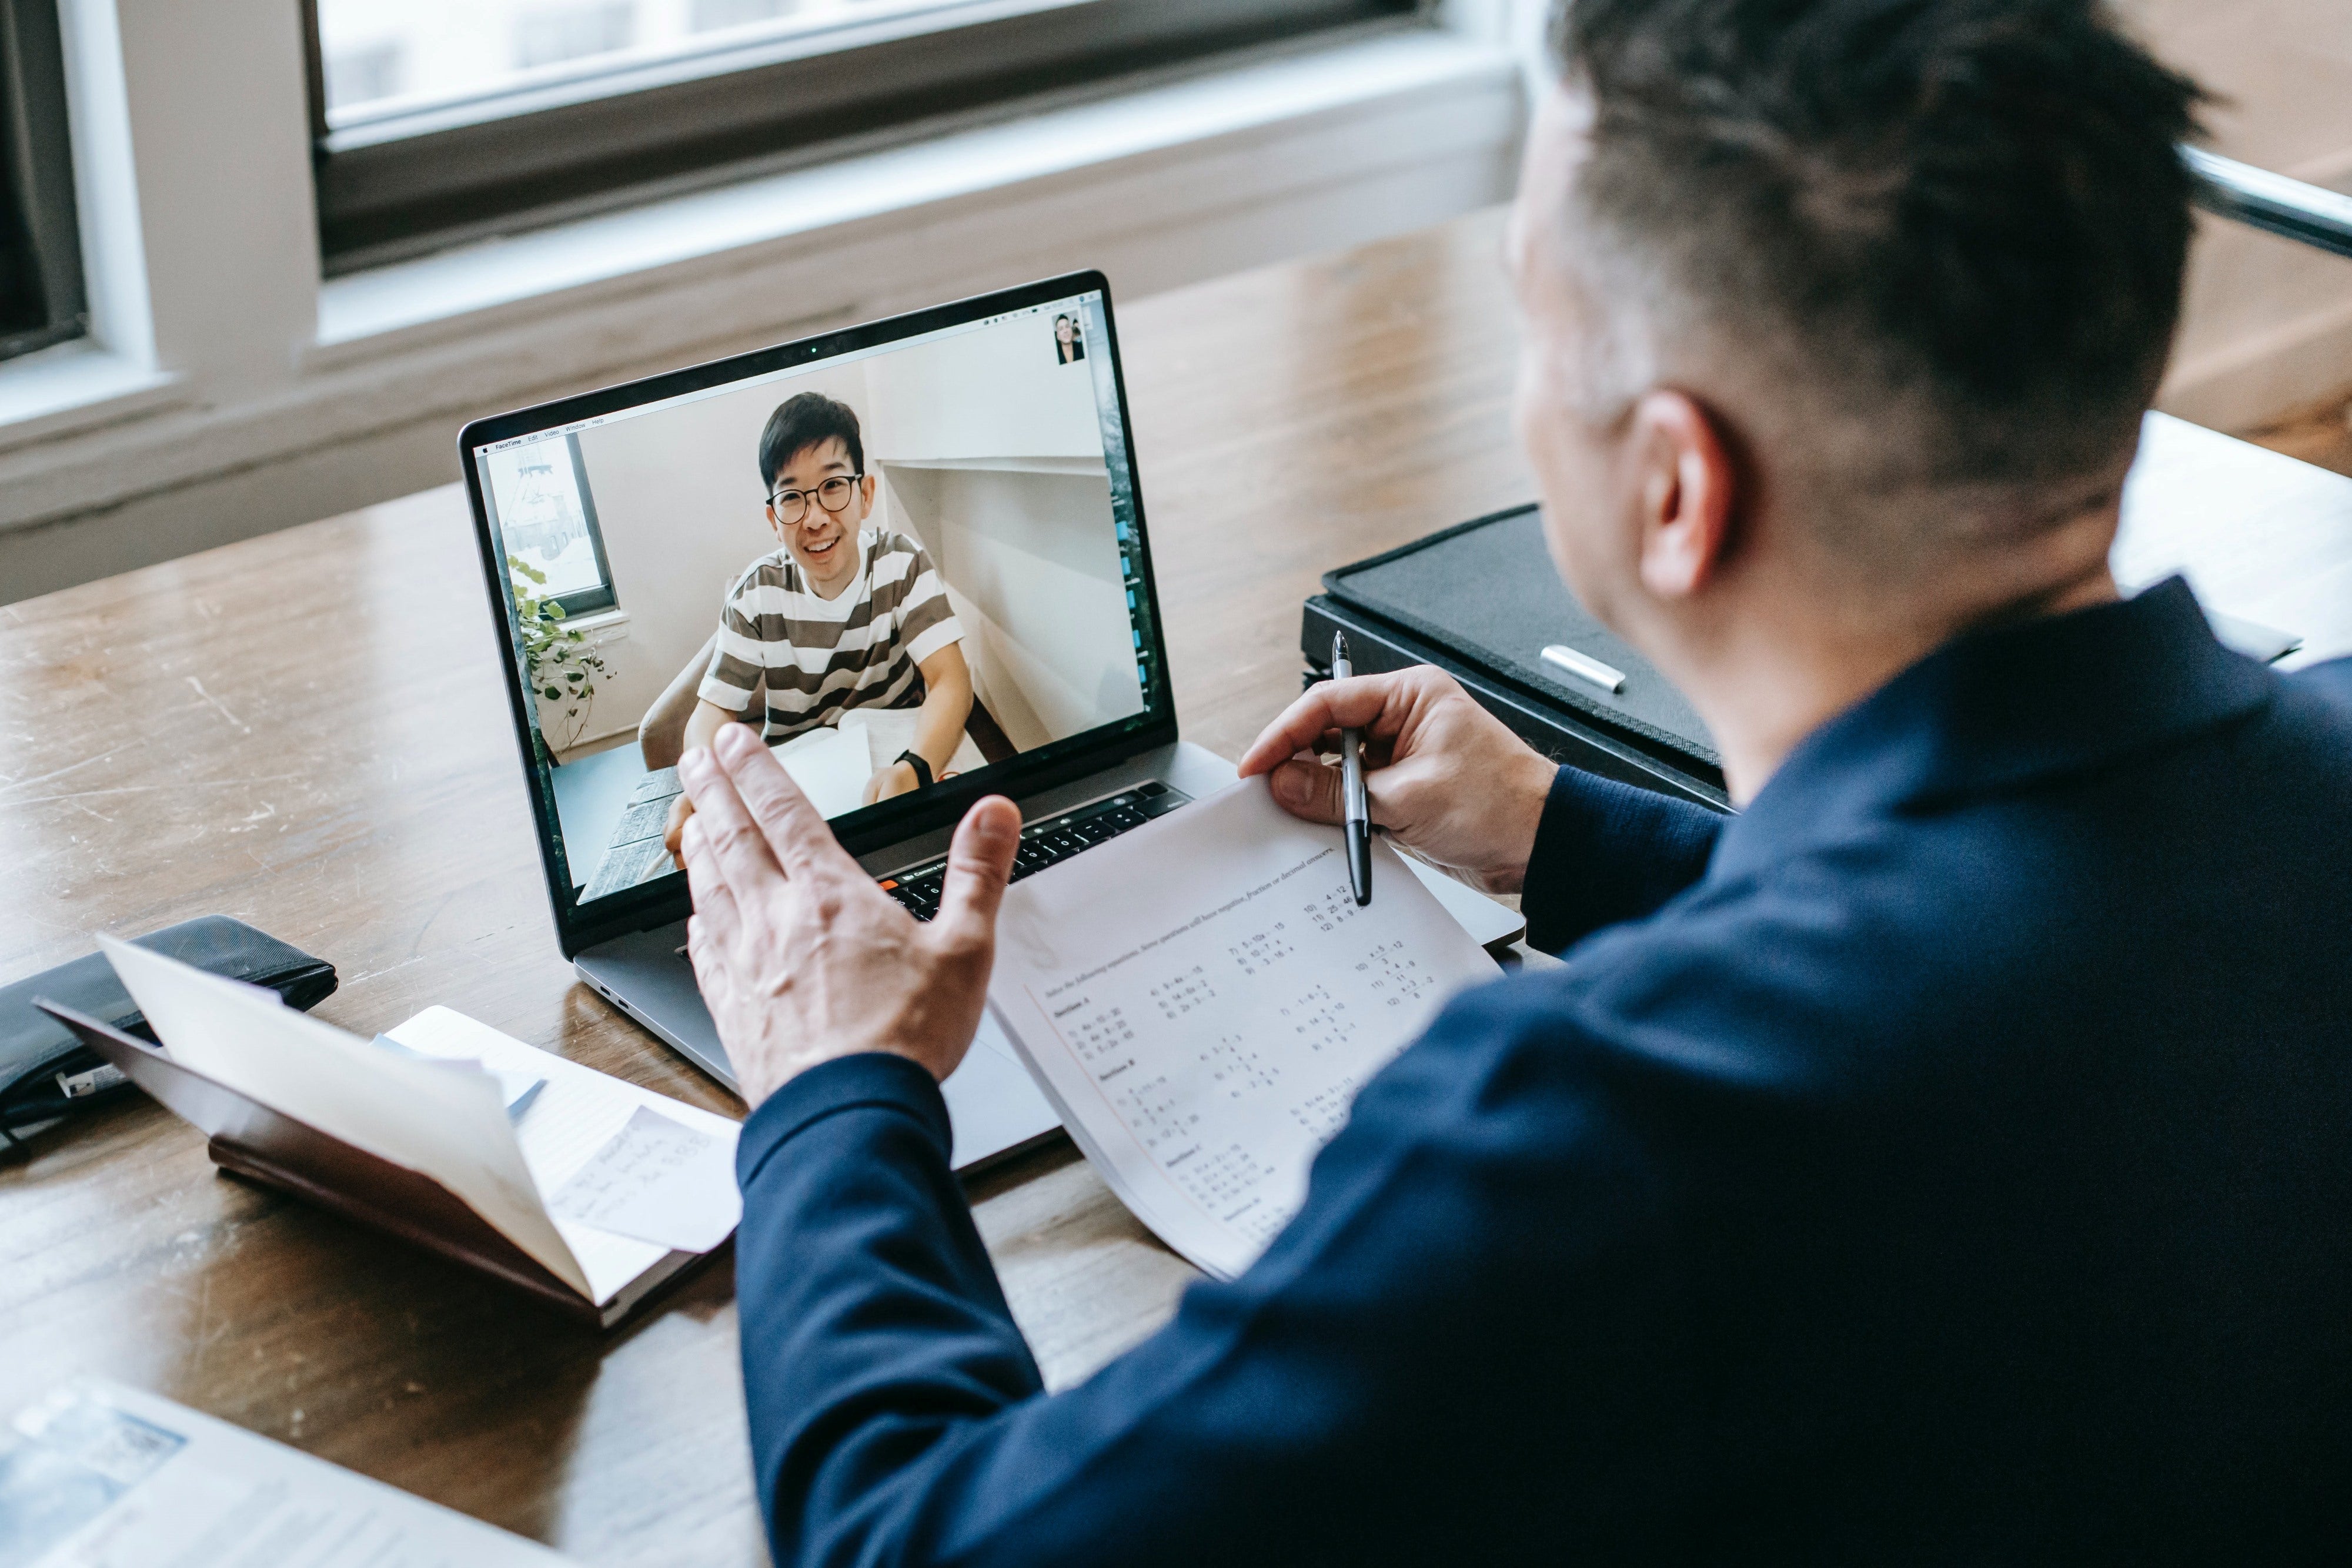 A modern video conferencing would attract and onboard a new talent faster